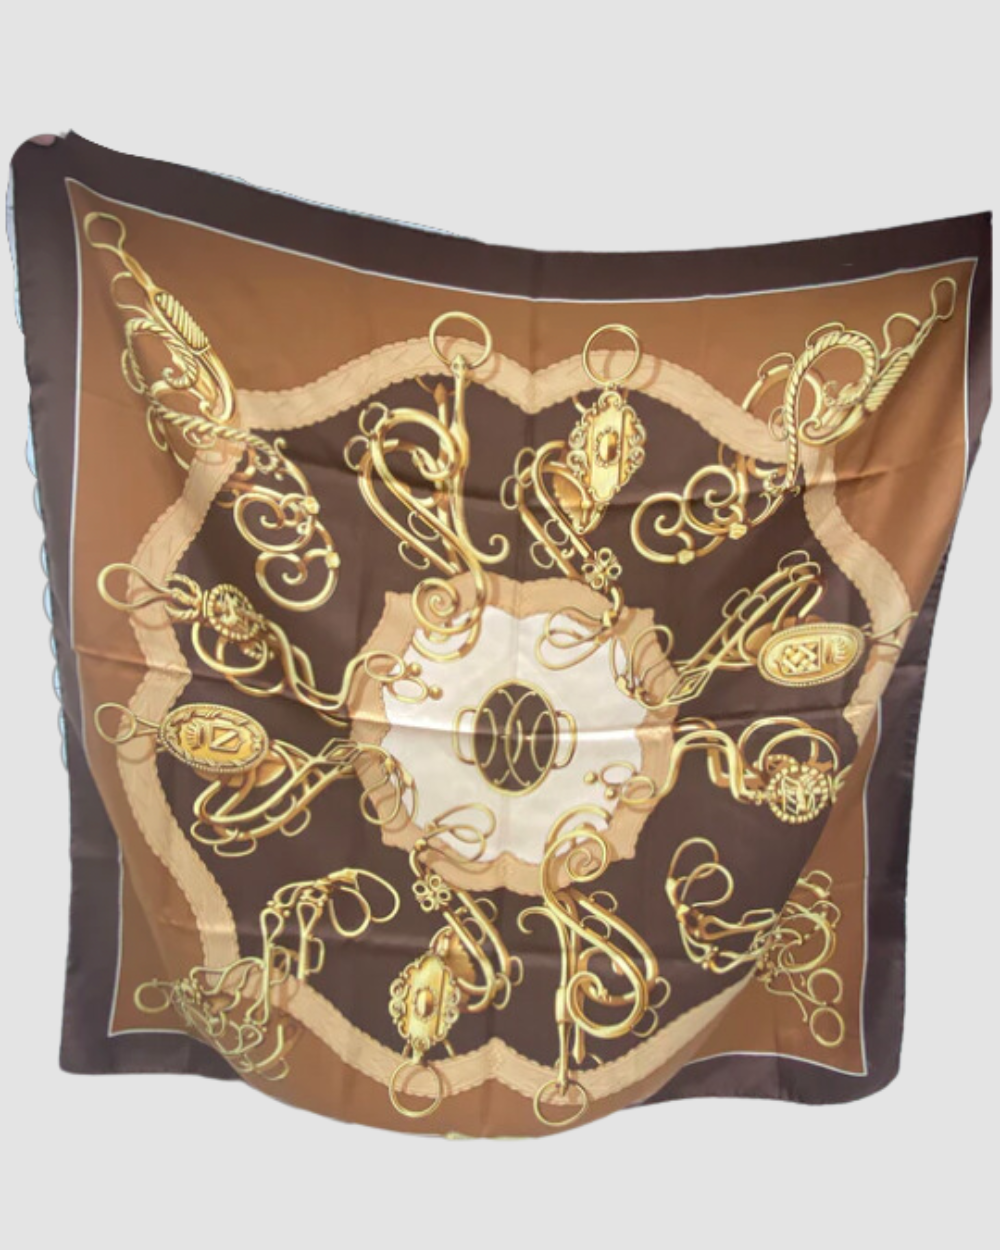 Hermes Brown and Gold Scarf